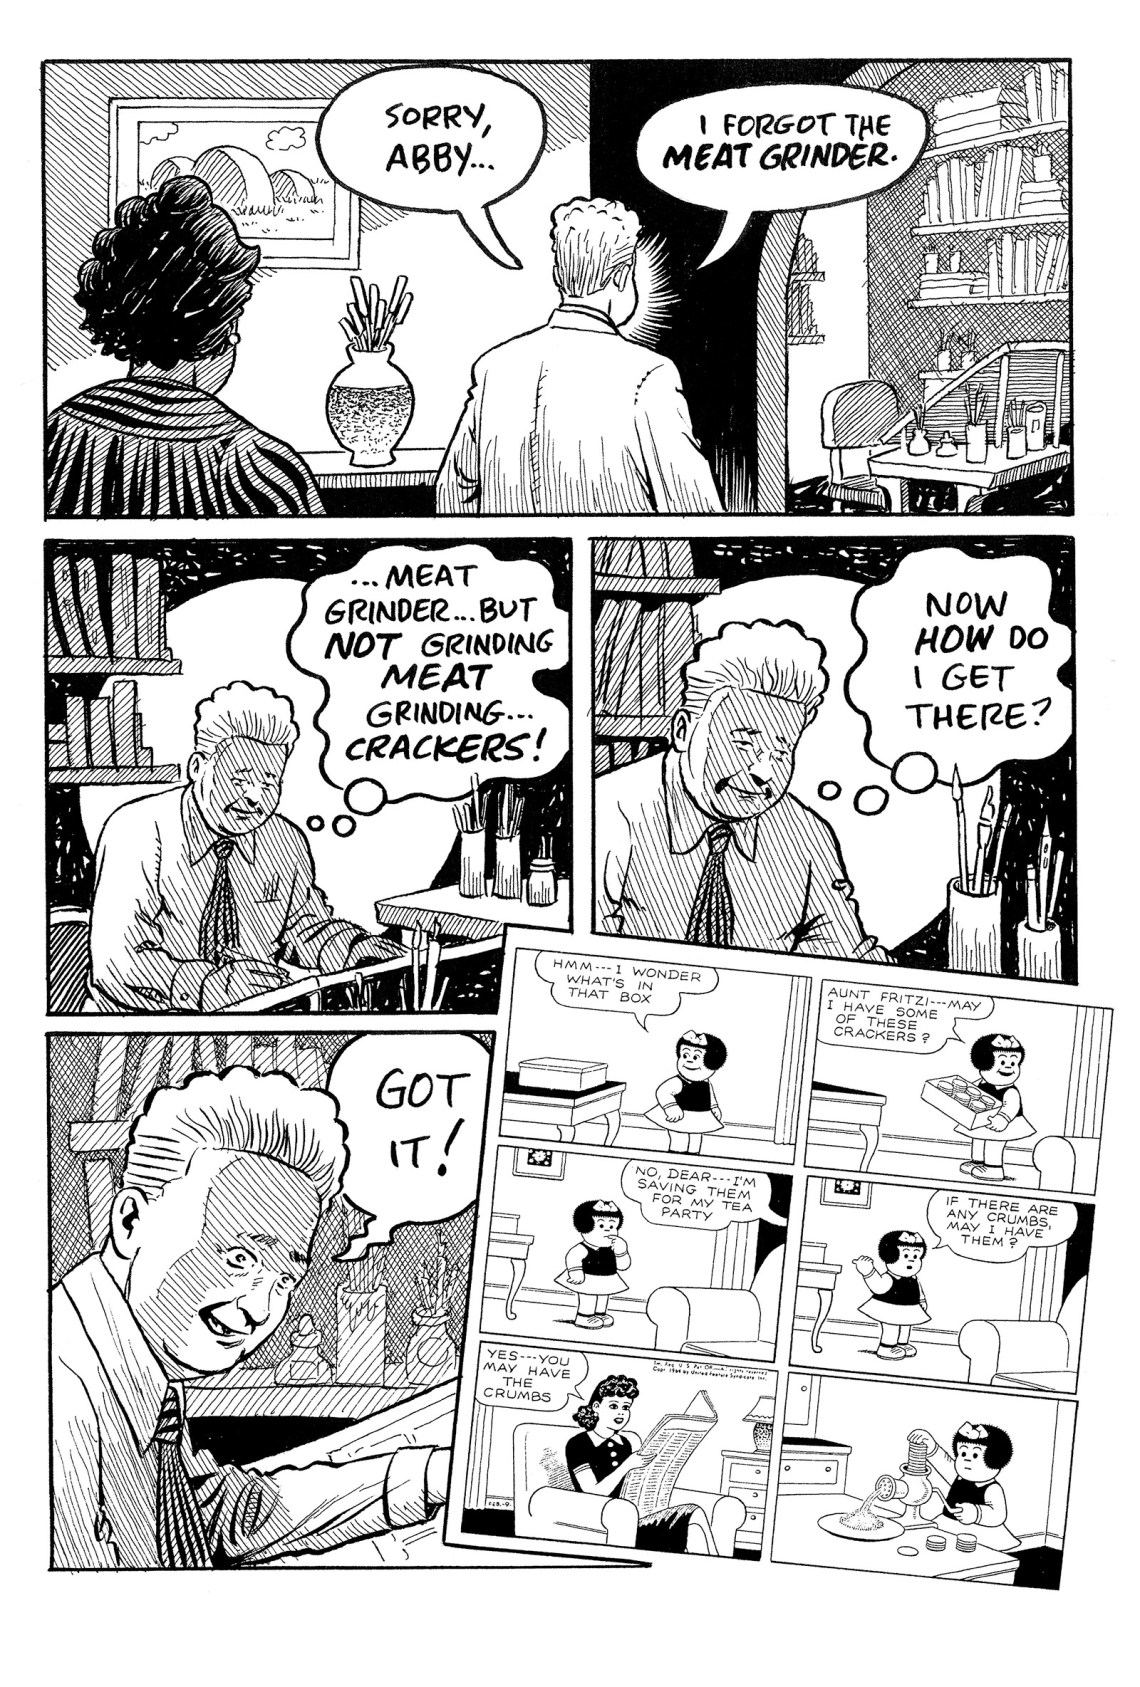 A page from Bill Griffith’s Three Rocks